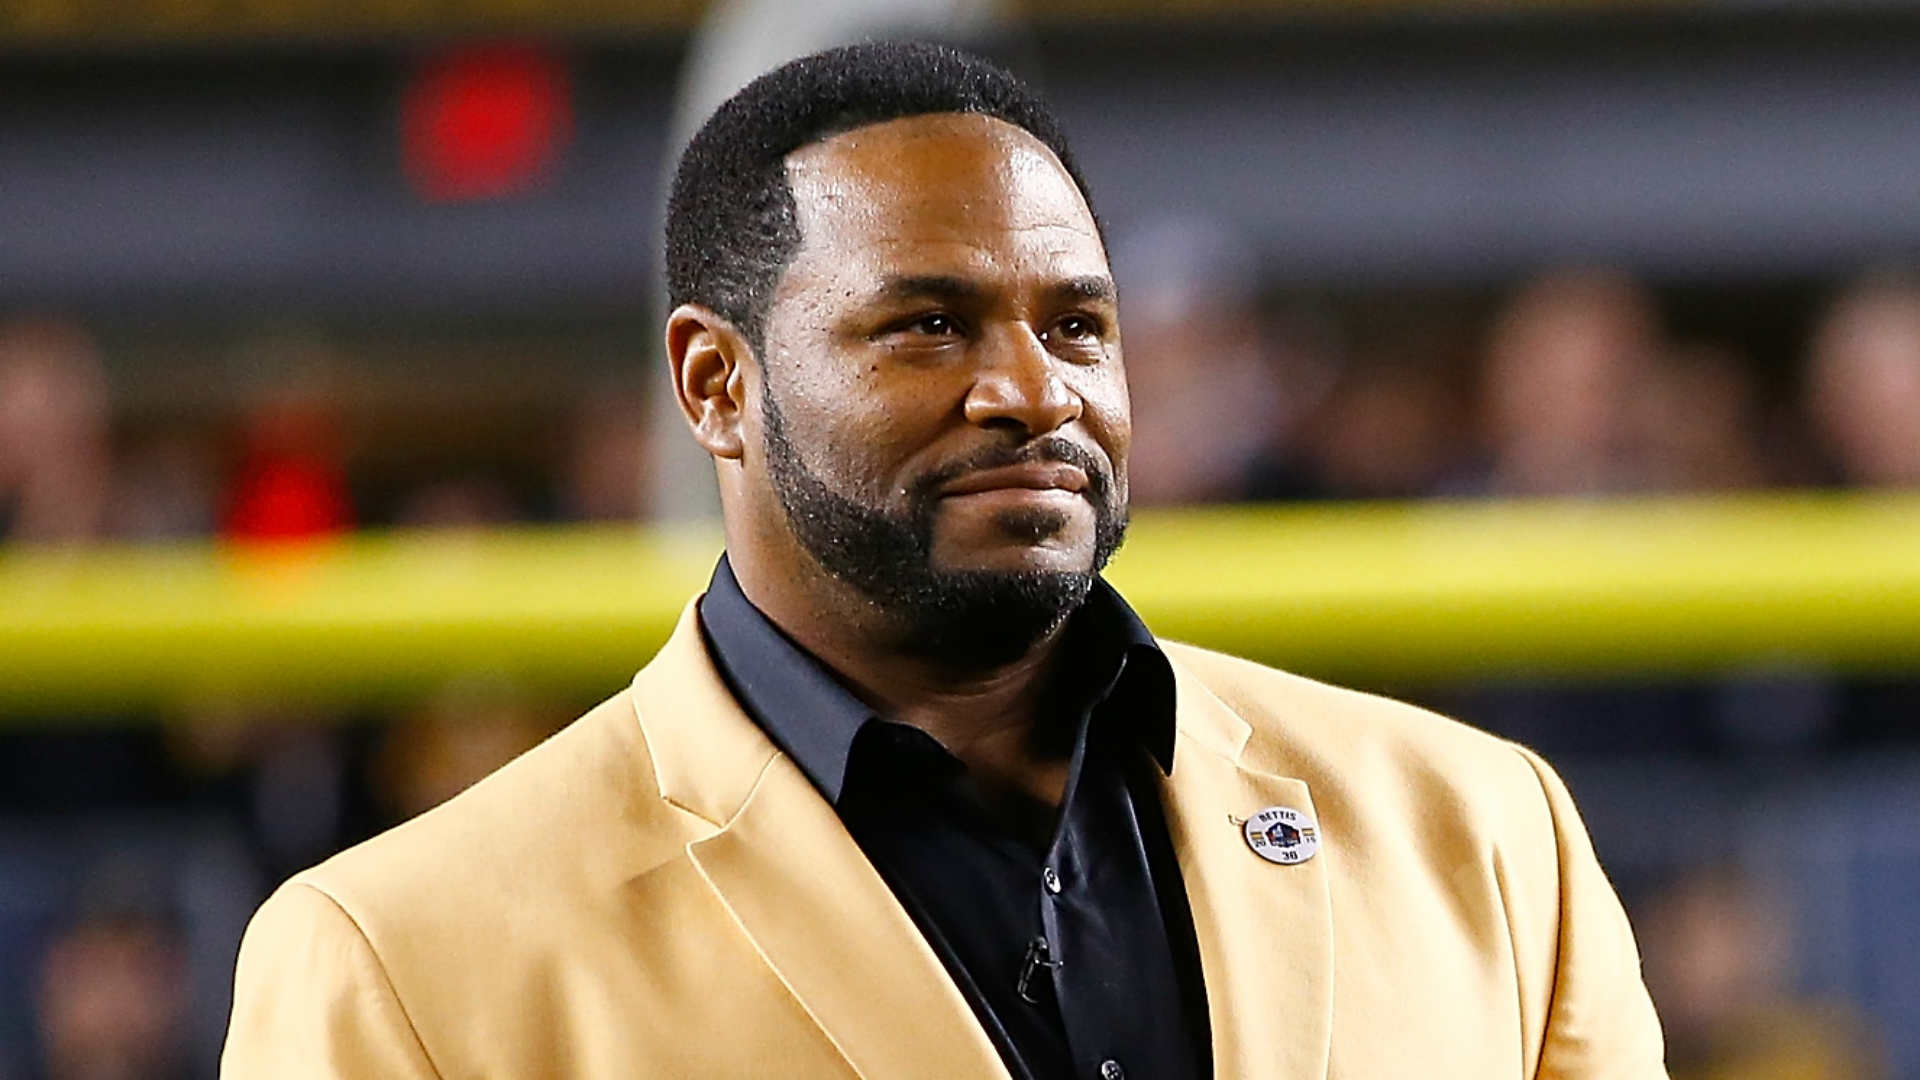 Jerome Bettis to Le'Veon Bell: You're not as good without Steelers